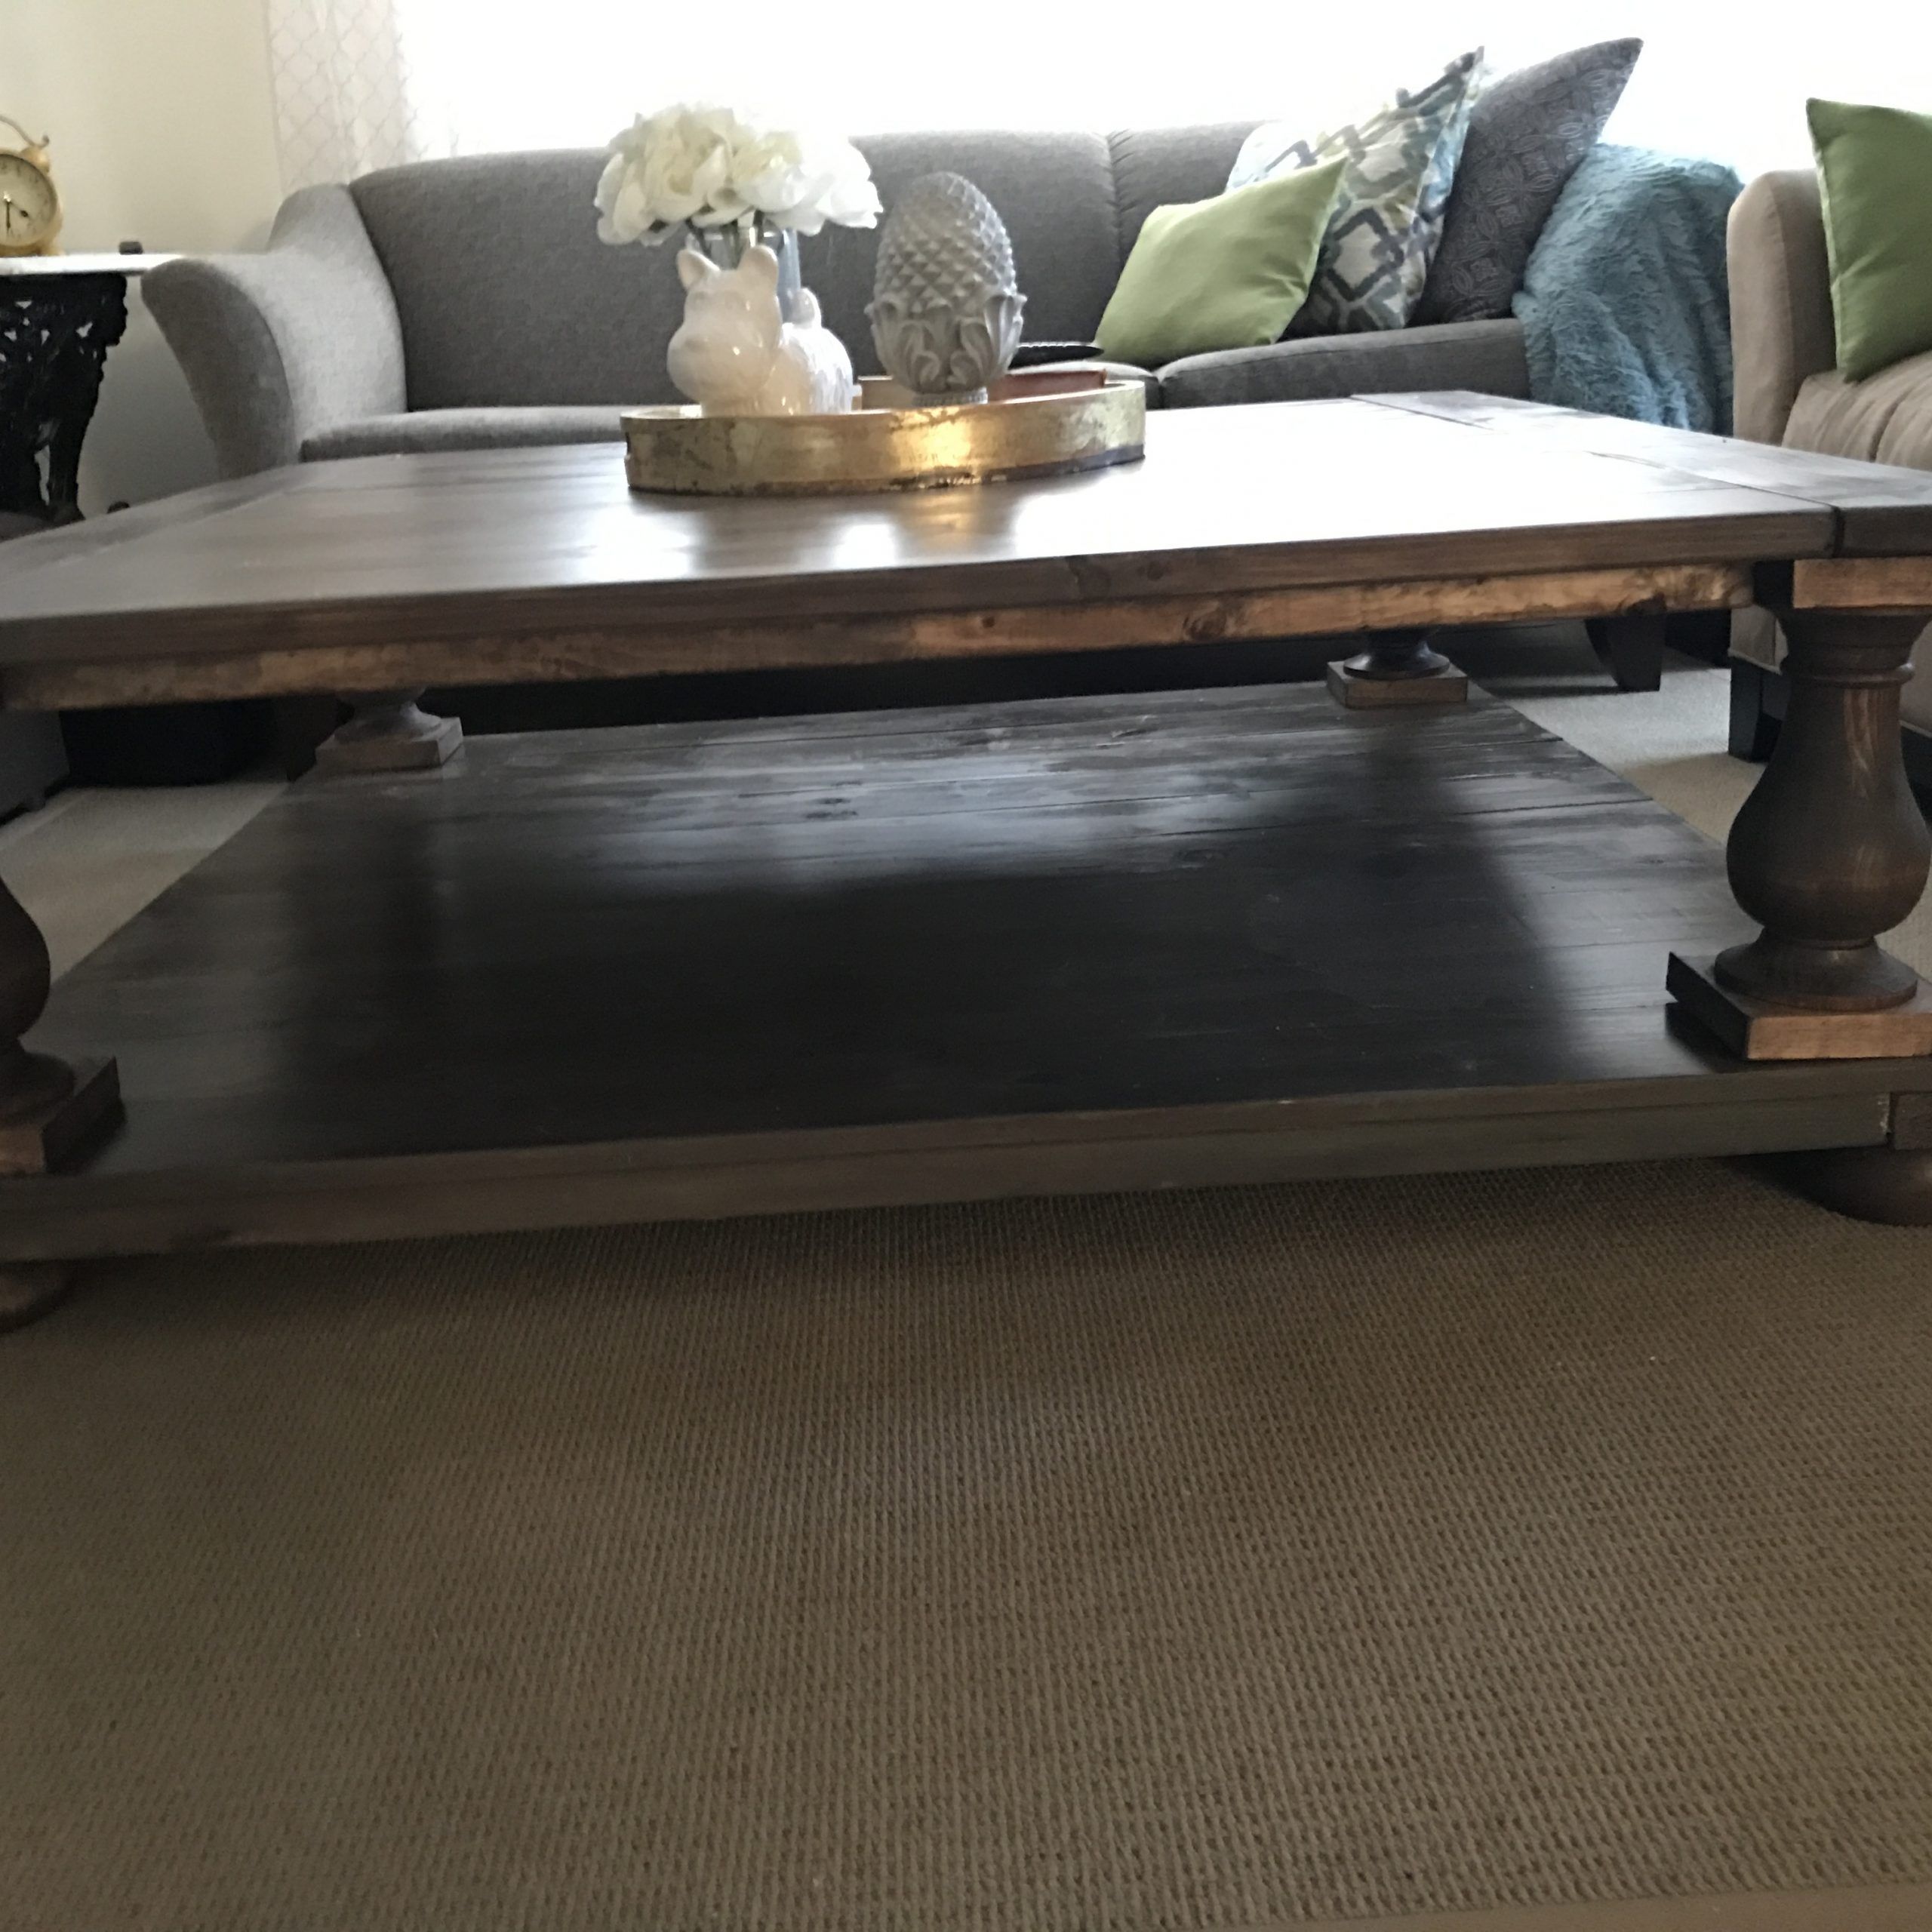 Large Square Balustrade Coffee Table | Ana White Regarding 1 Shelf Square Coffee Tables (View 11 of 15)